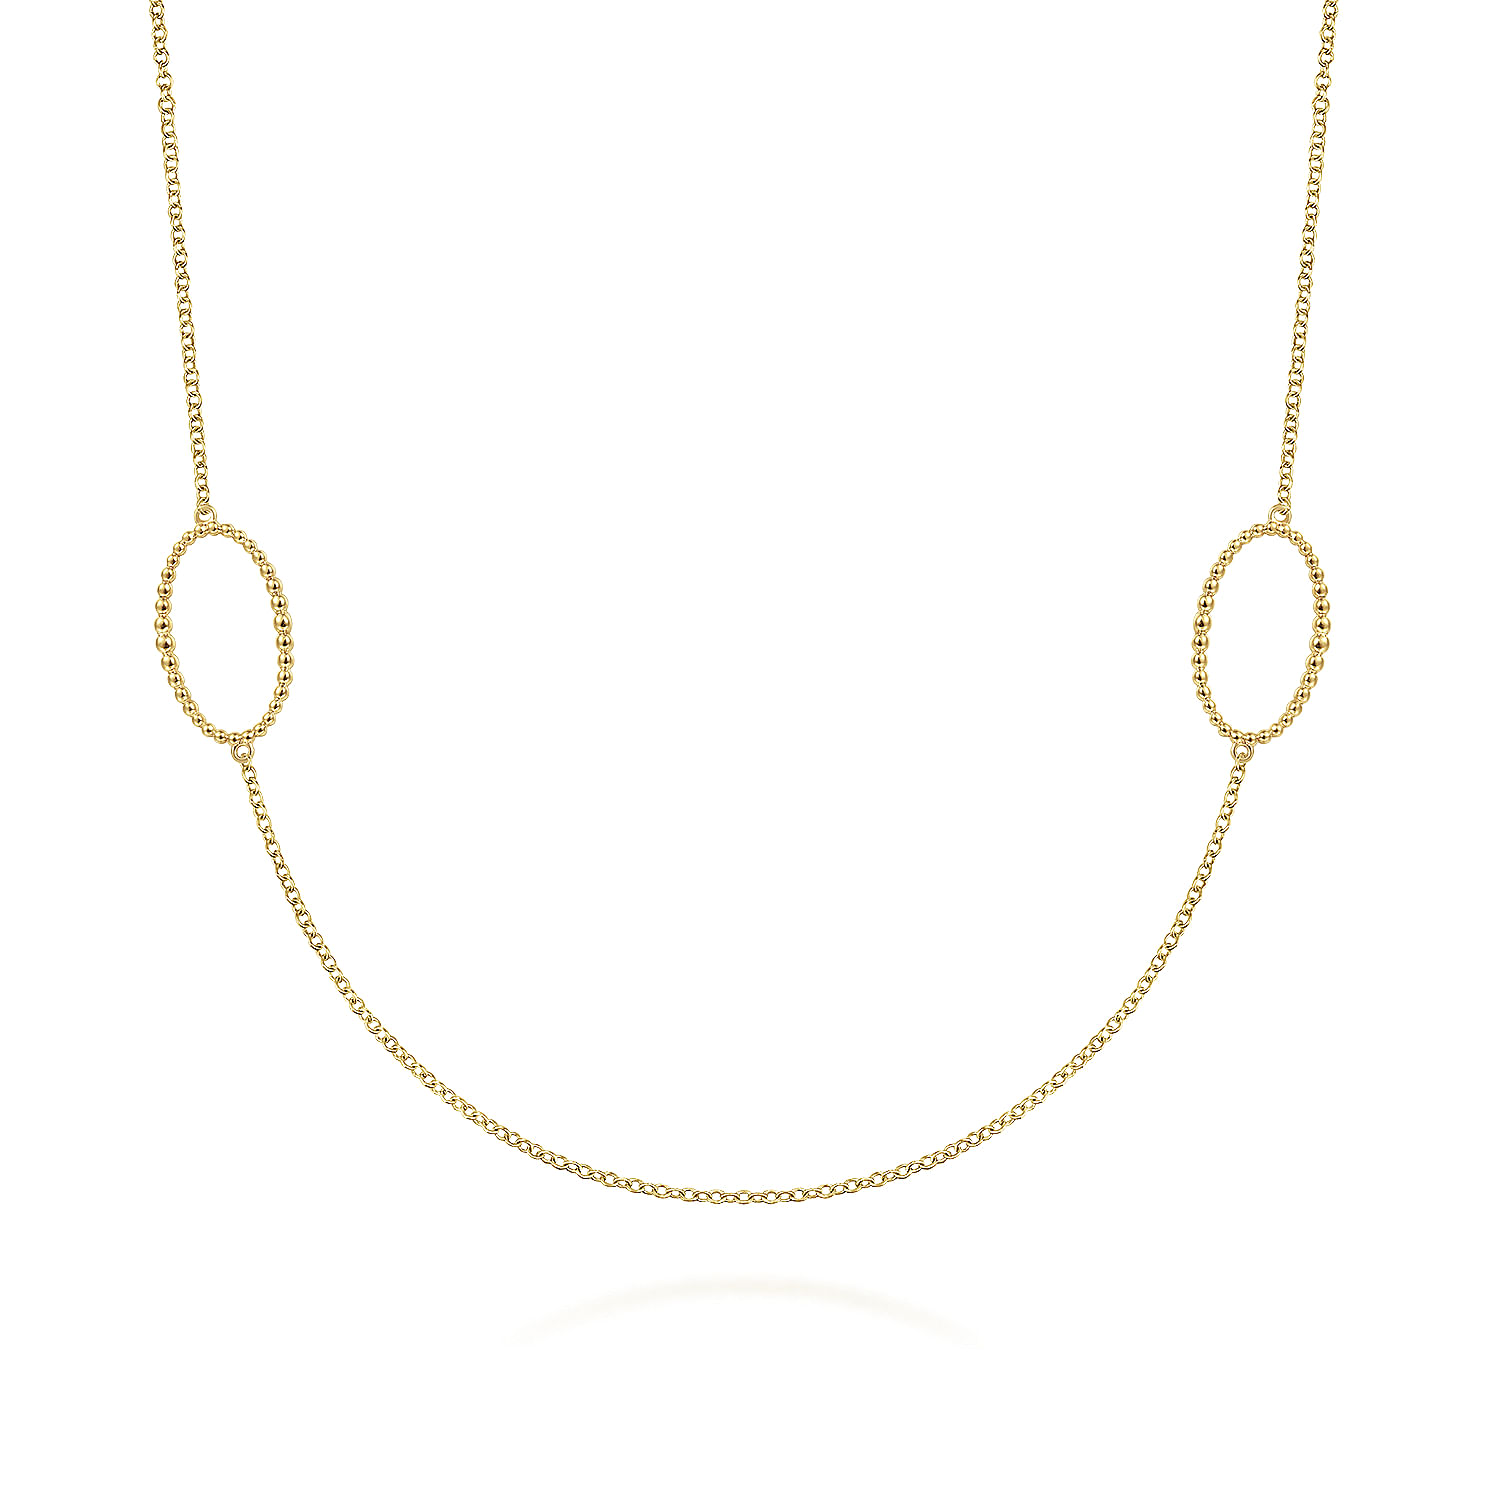 28 inch 14K Yellow Gold Bujukan Beaded Oval Station Necklace